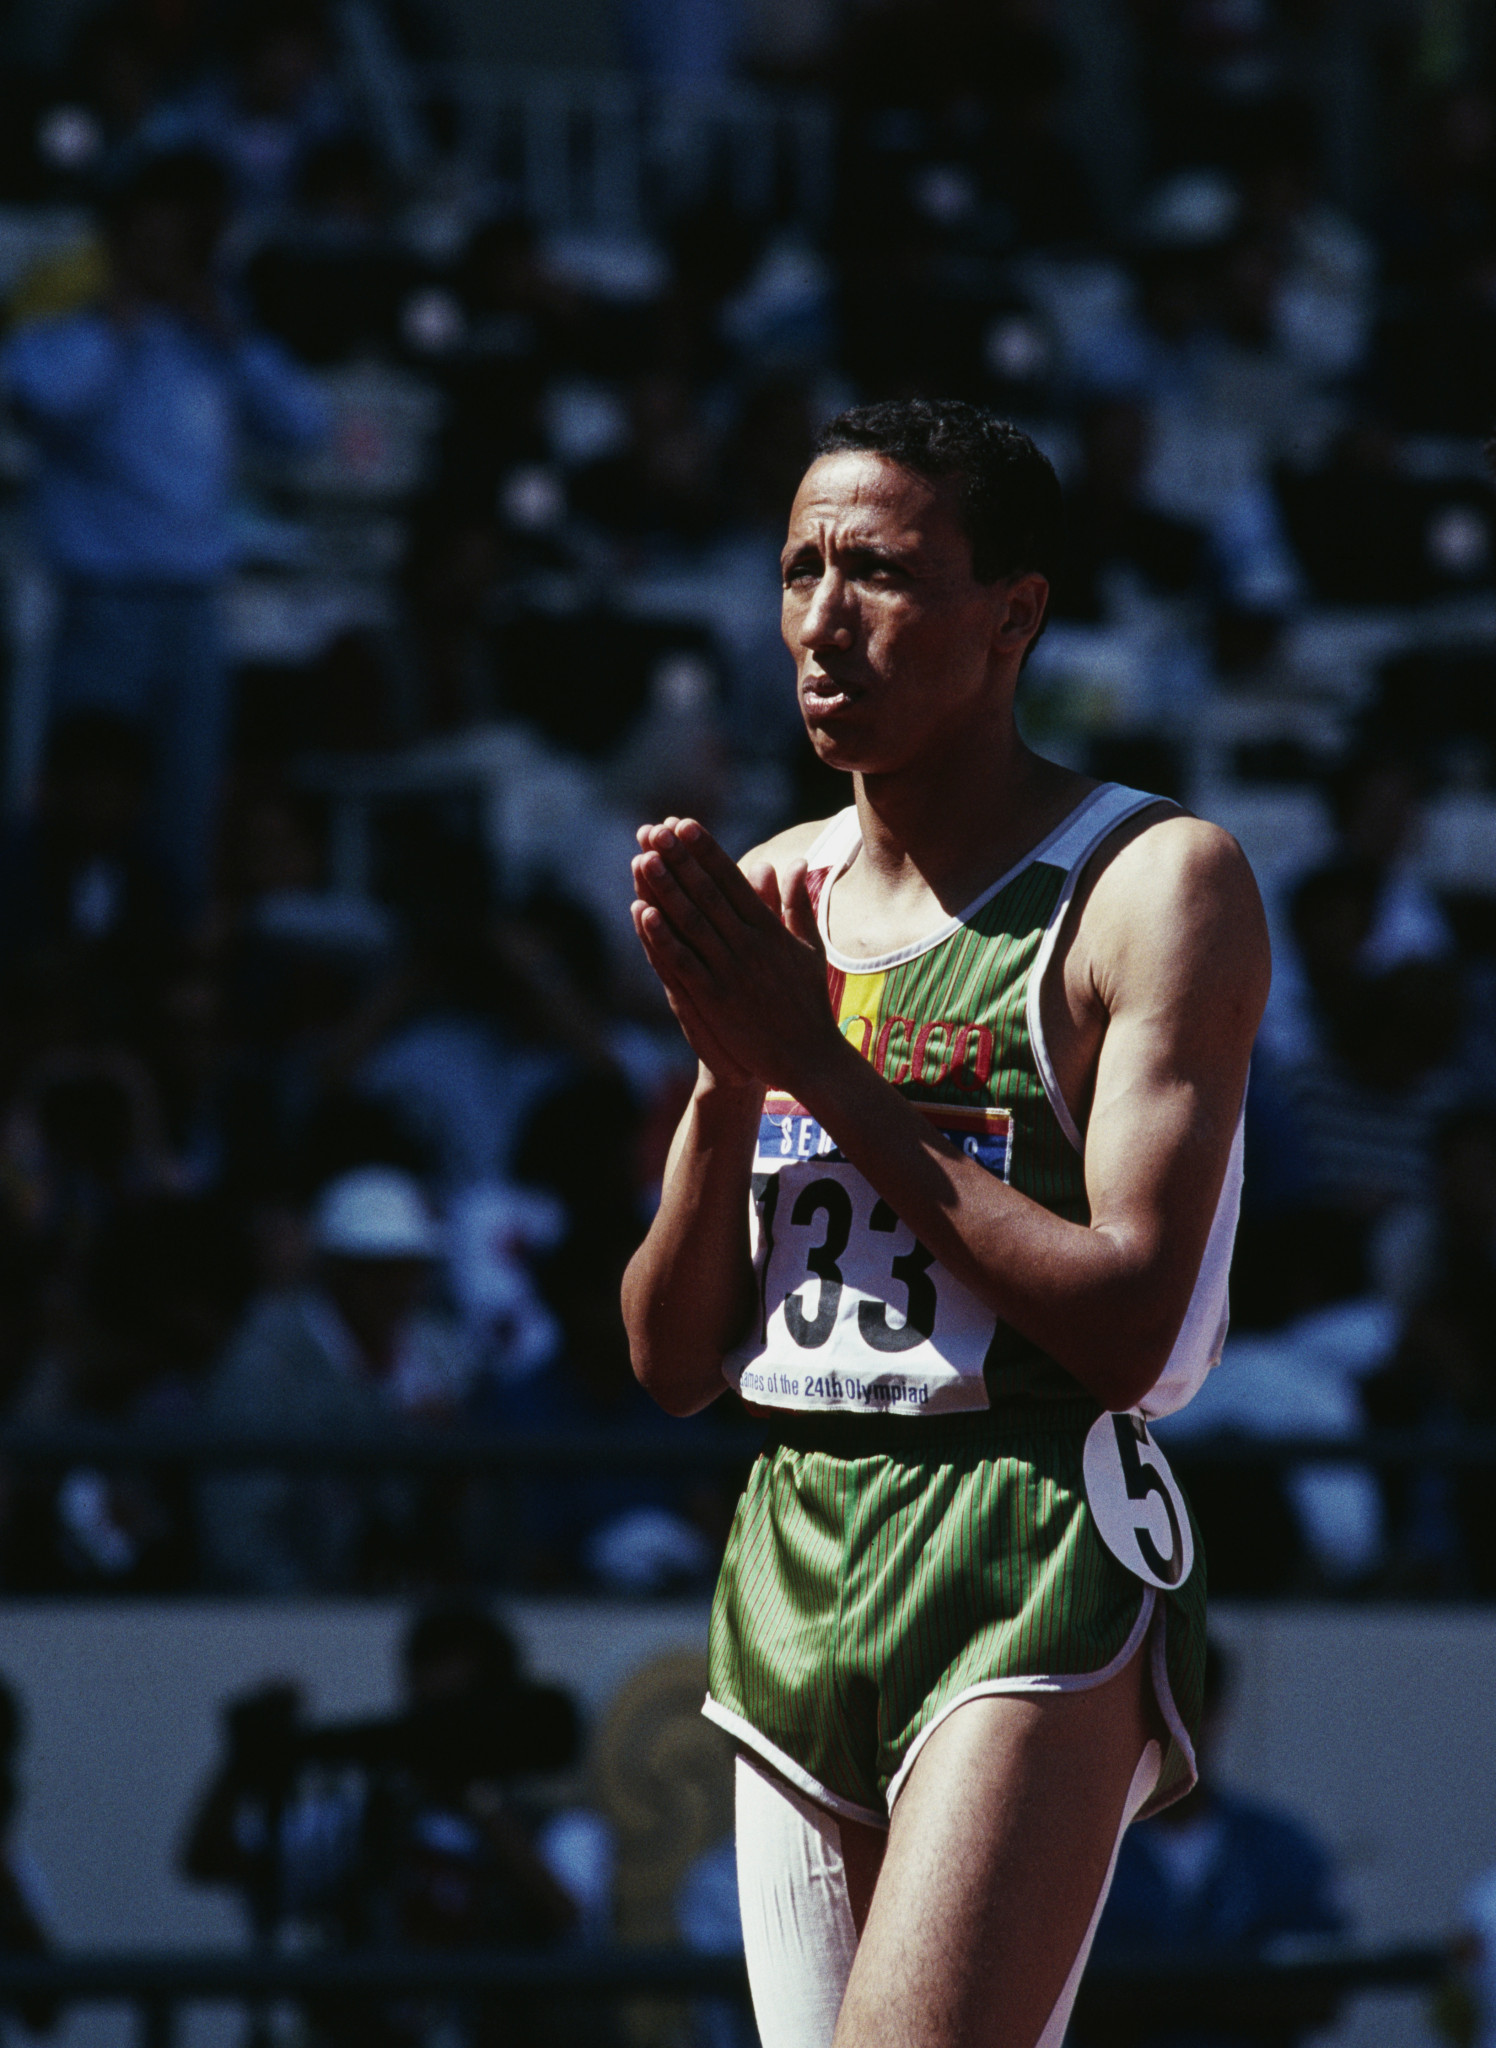 The investigation heard from 1984 Olympic 5,000 metres champion Said Aouita ©Getty Images